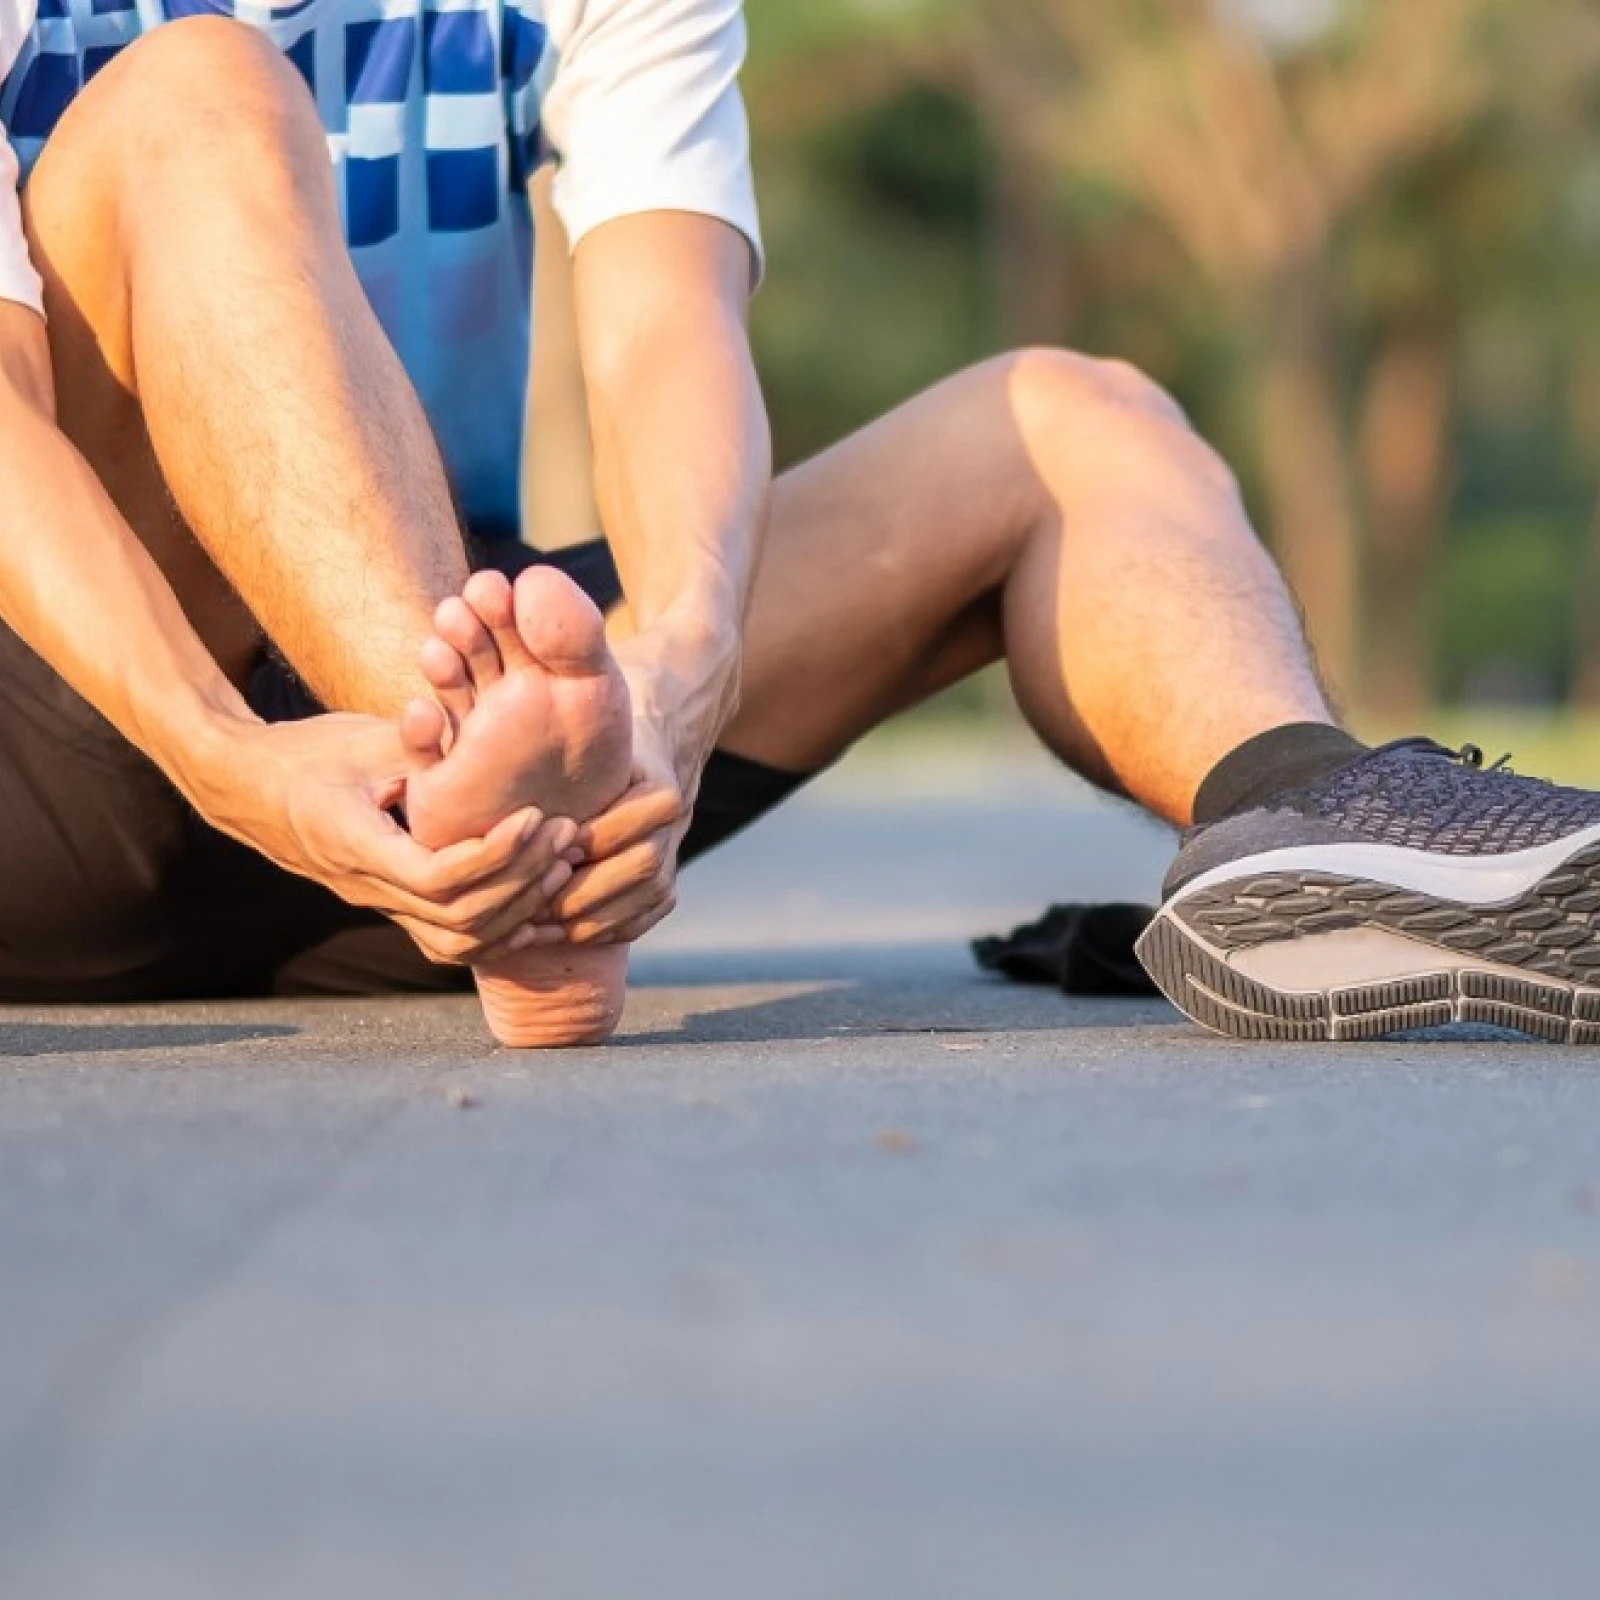 Causes of Foot Pain from Running